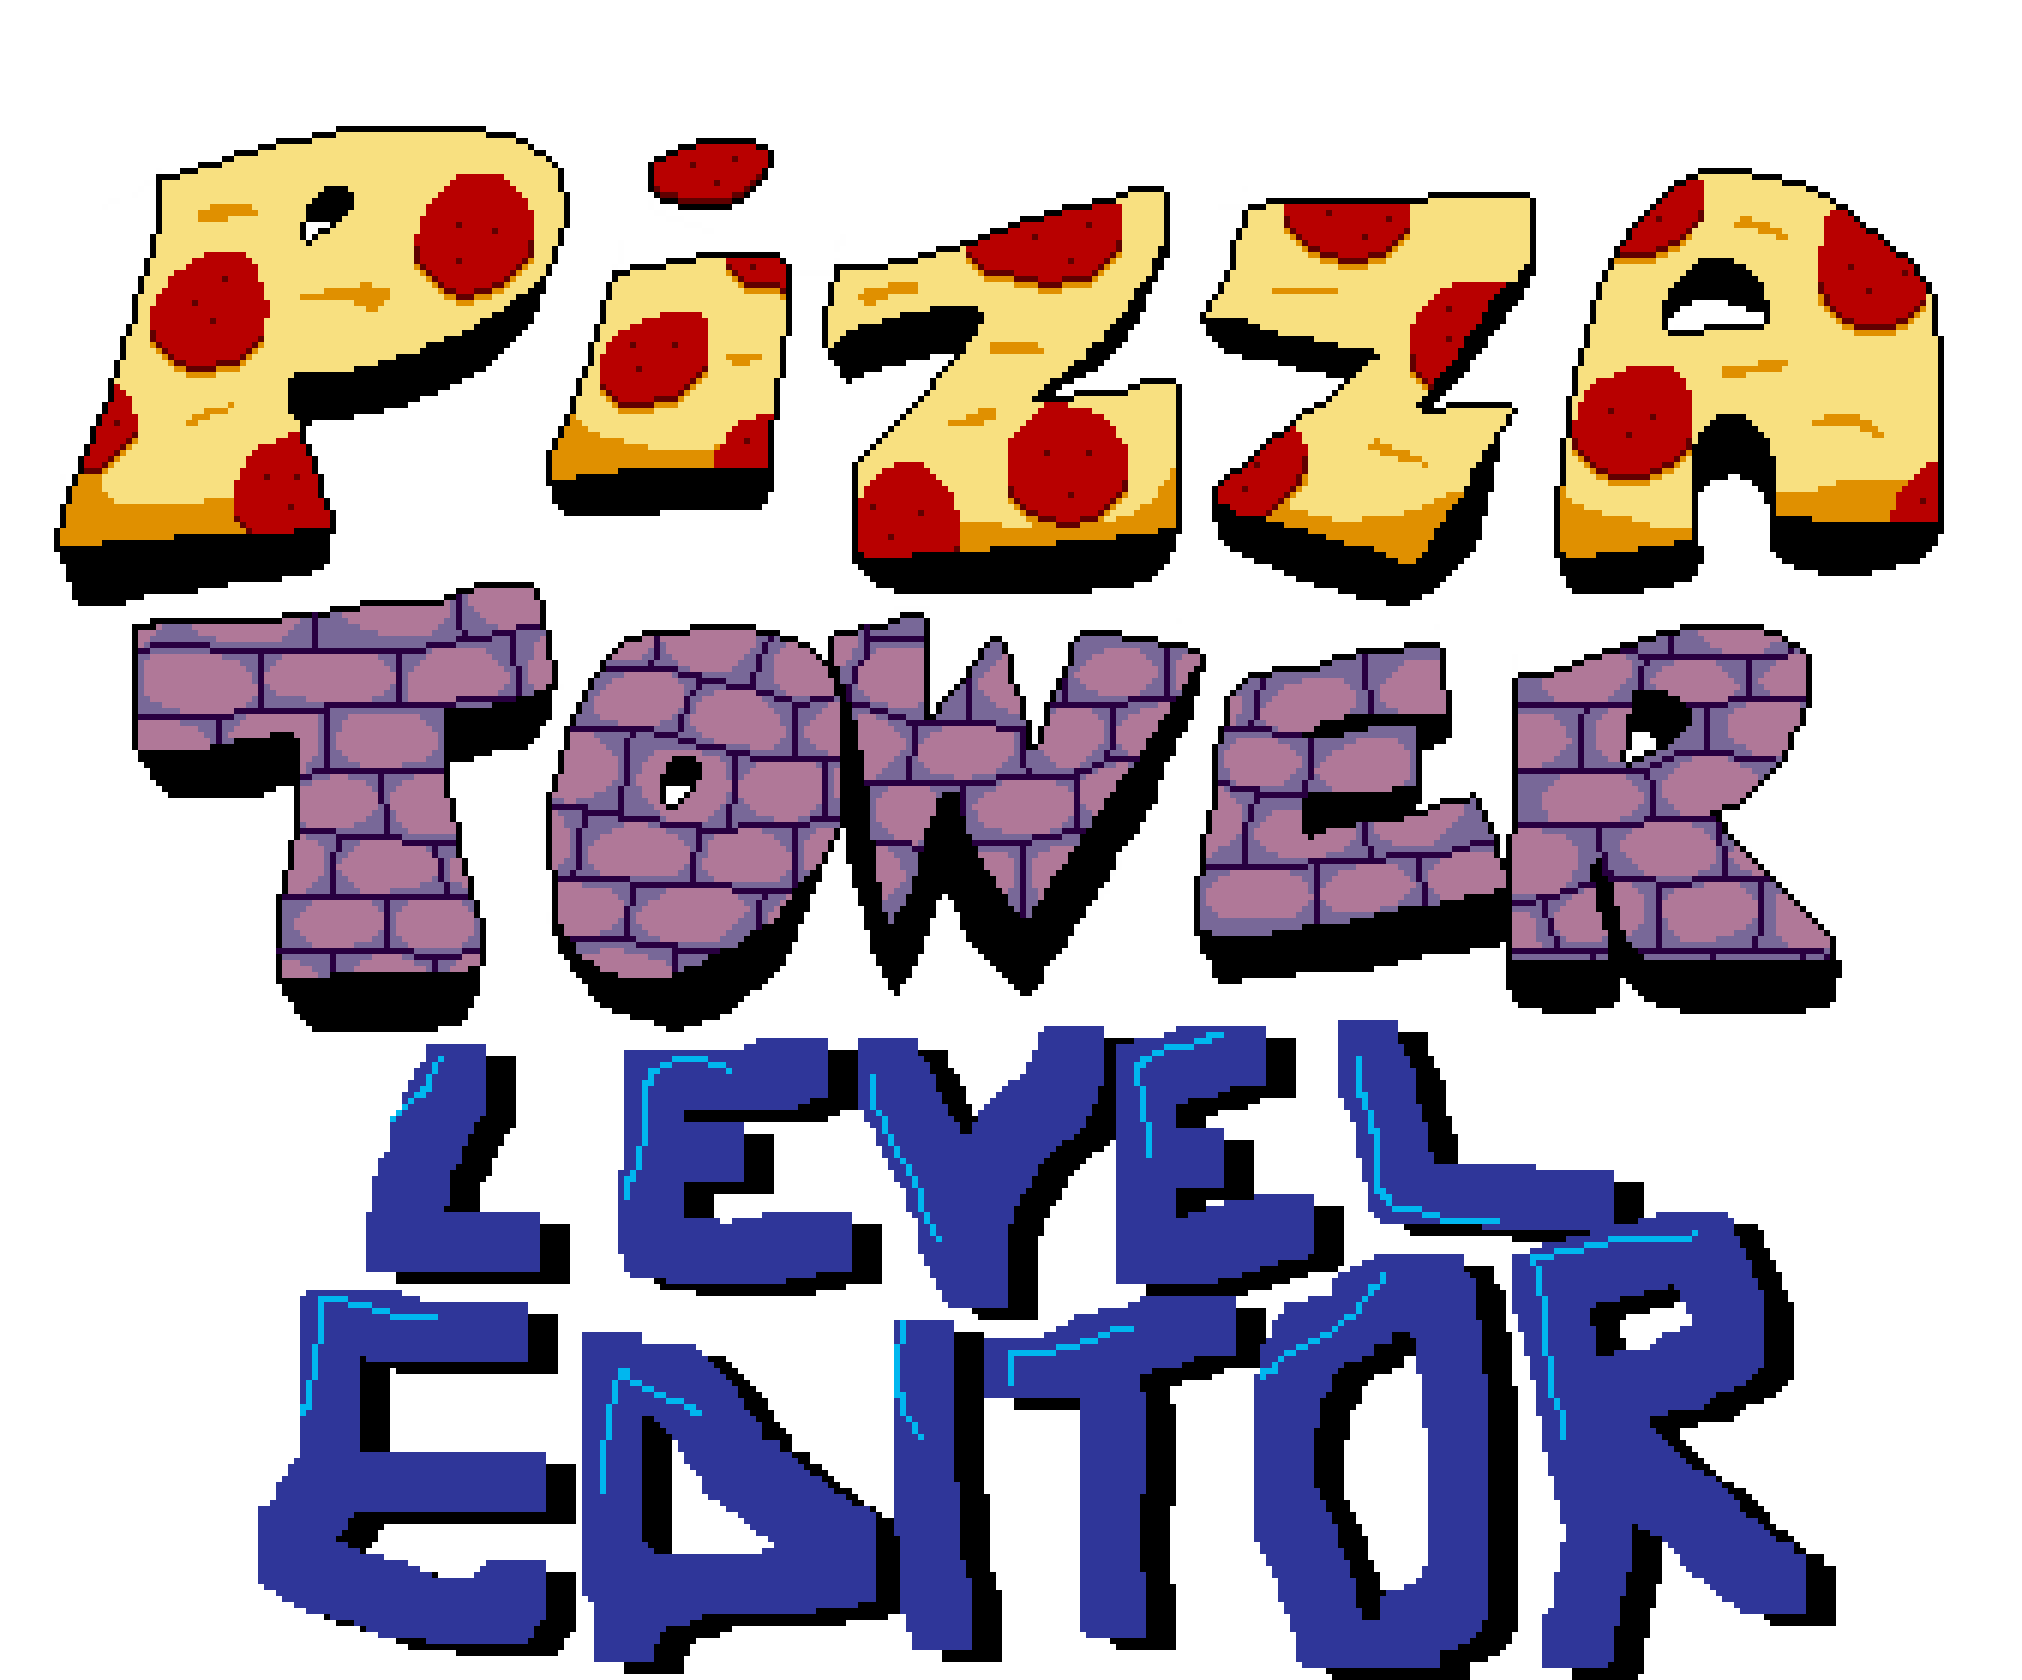 Pizza Tower Mobile APK: How to Play Pizza Tower on Android Guide